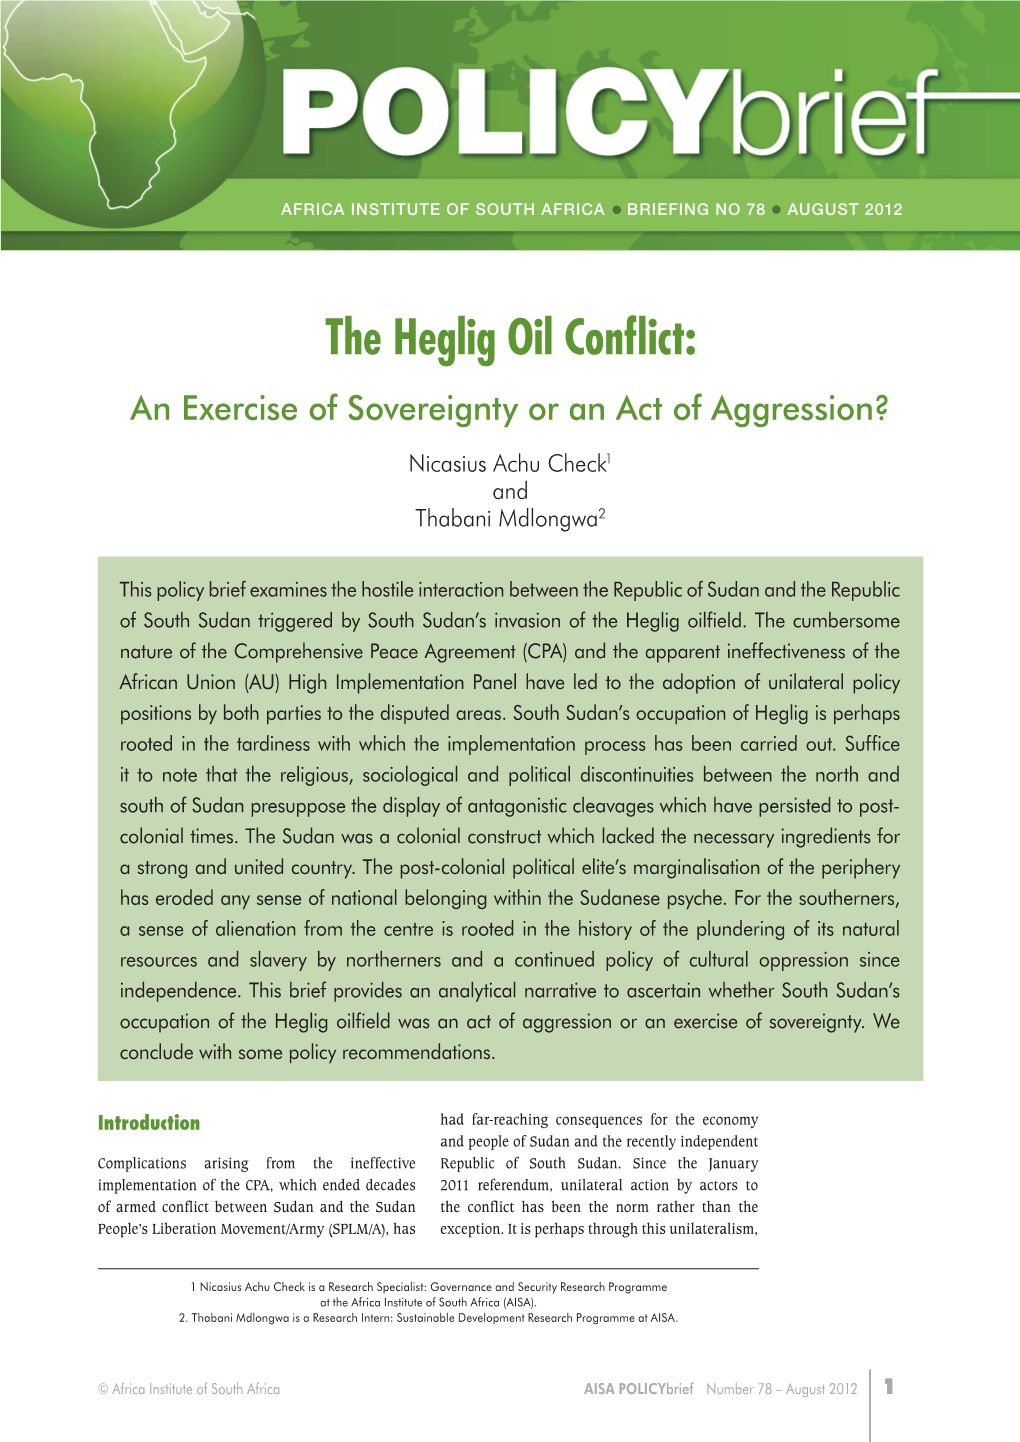 The Heglig Oil Conflict: an Exercise of Sovereignty Or an Act of Aggression?